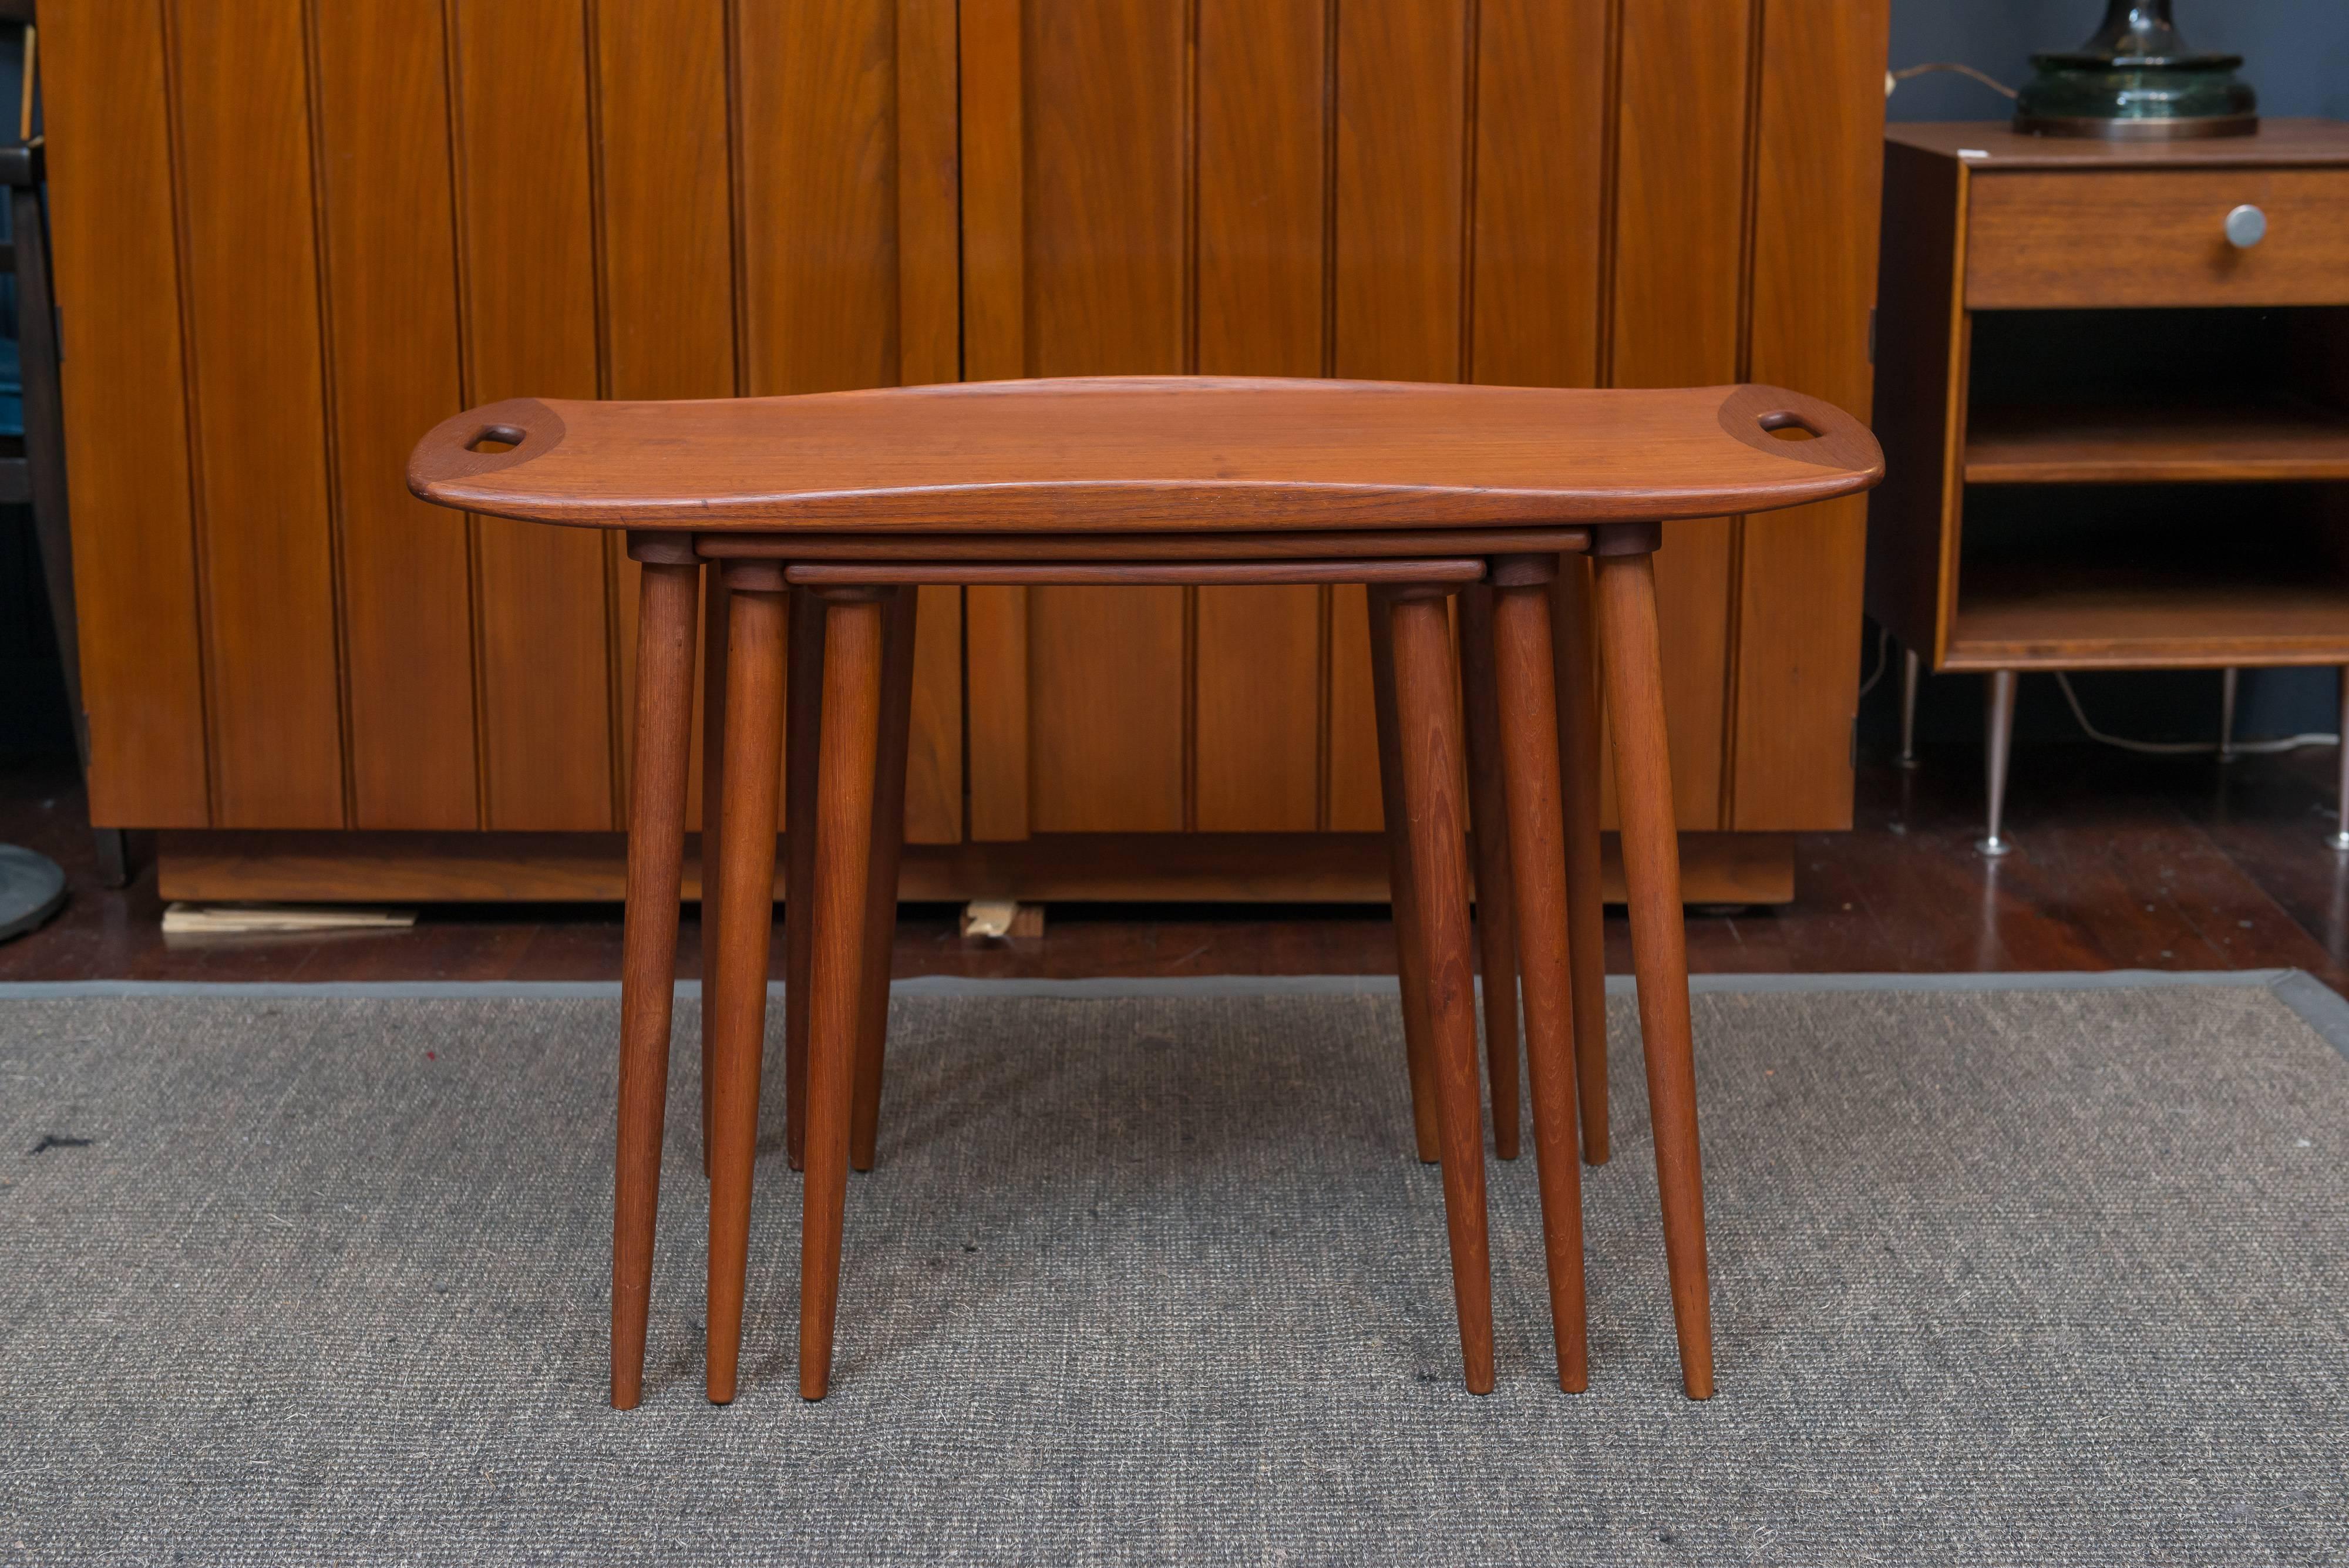 Sculptural set of three teak nesting tables designed by Jens Quistgaard for Nissen, Denmark. The top one having tray handles on tapering legs. Very good vintage condition.